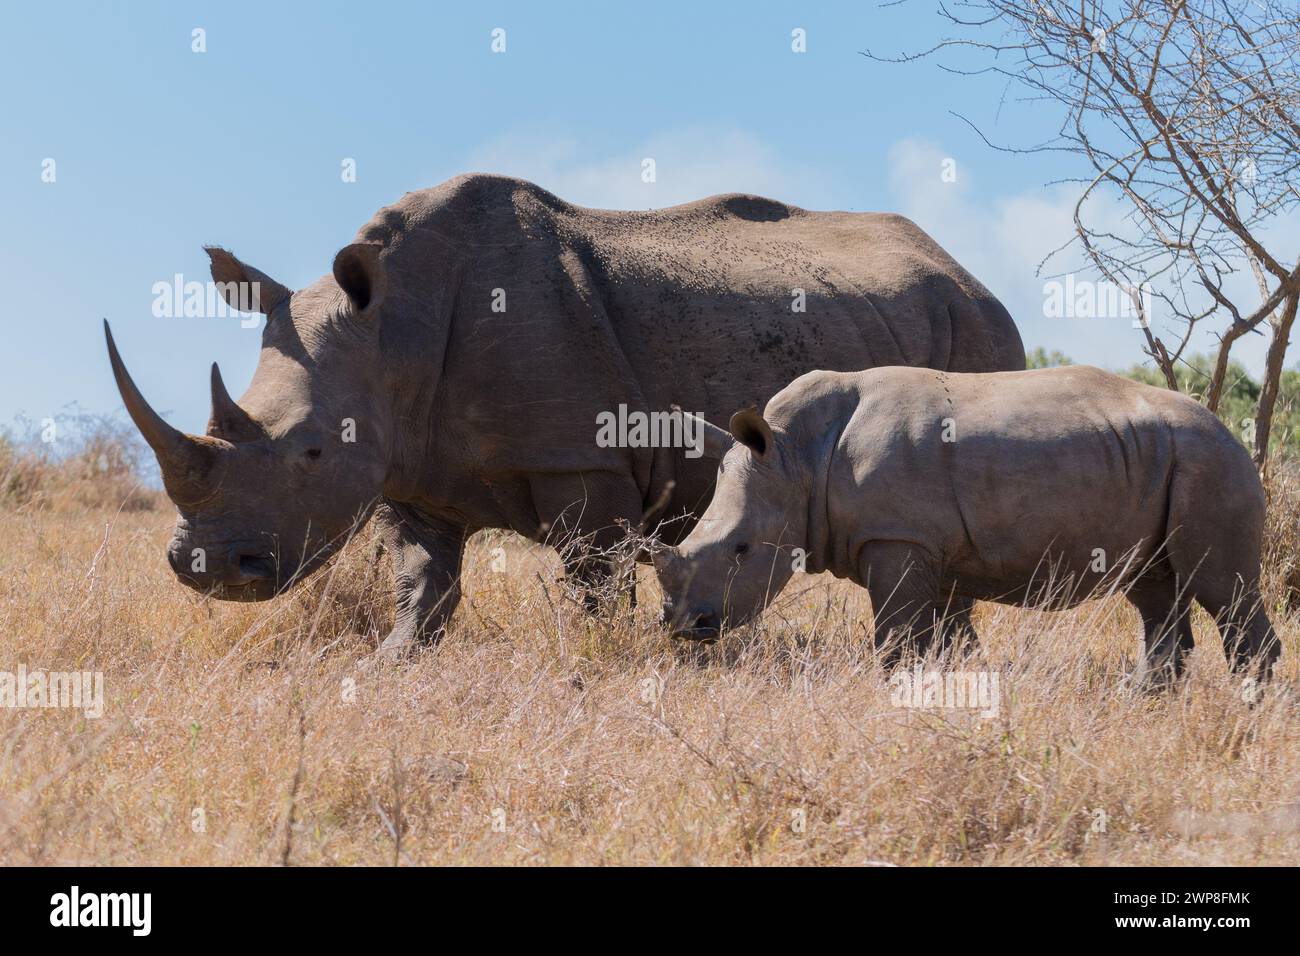 The two rhinos grazing on grass in the wild field Stock Photo